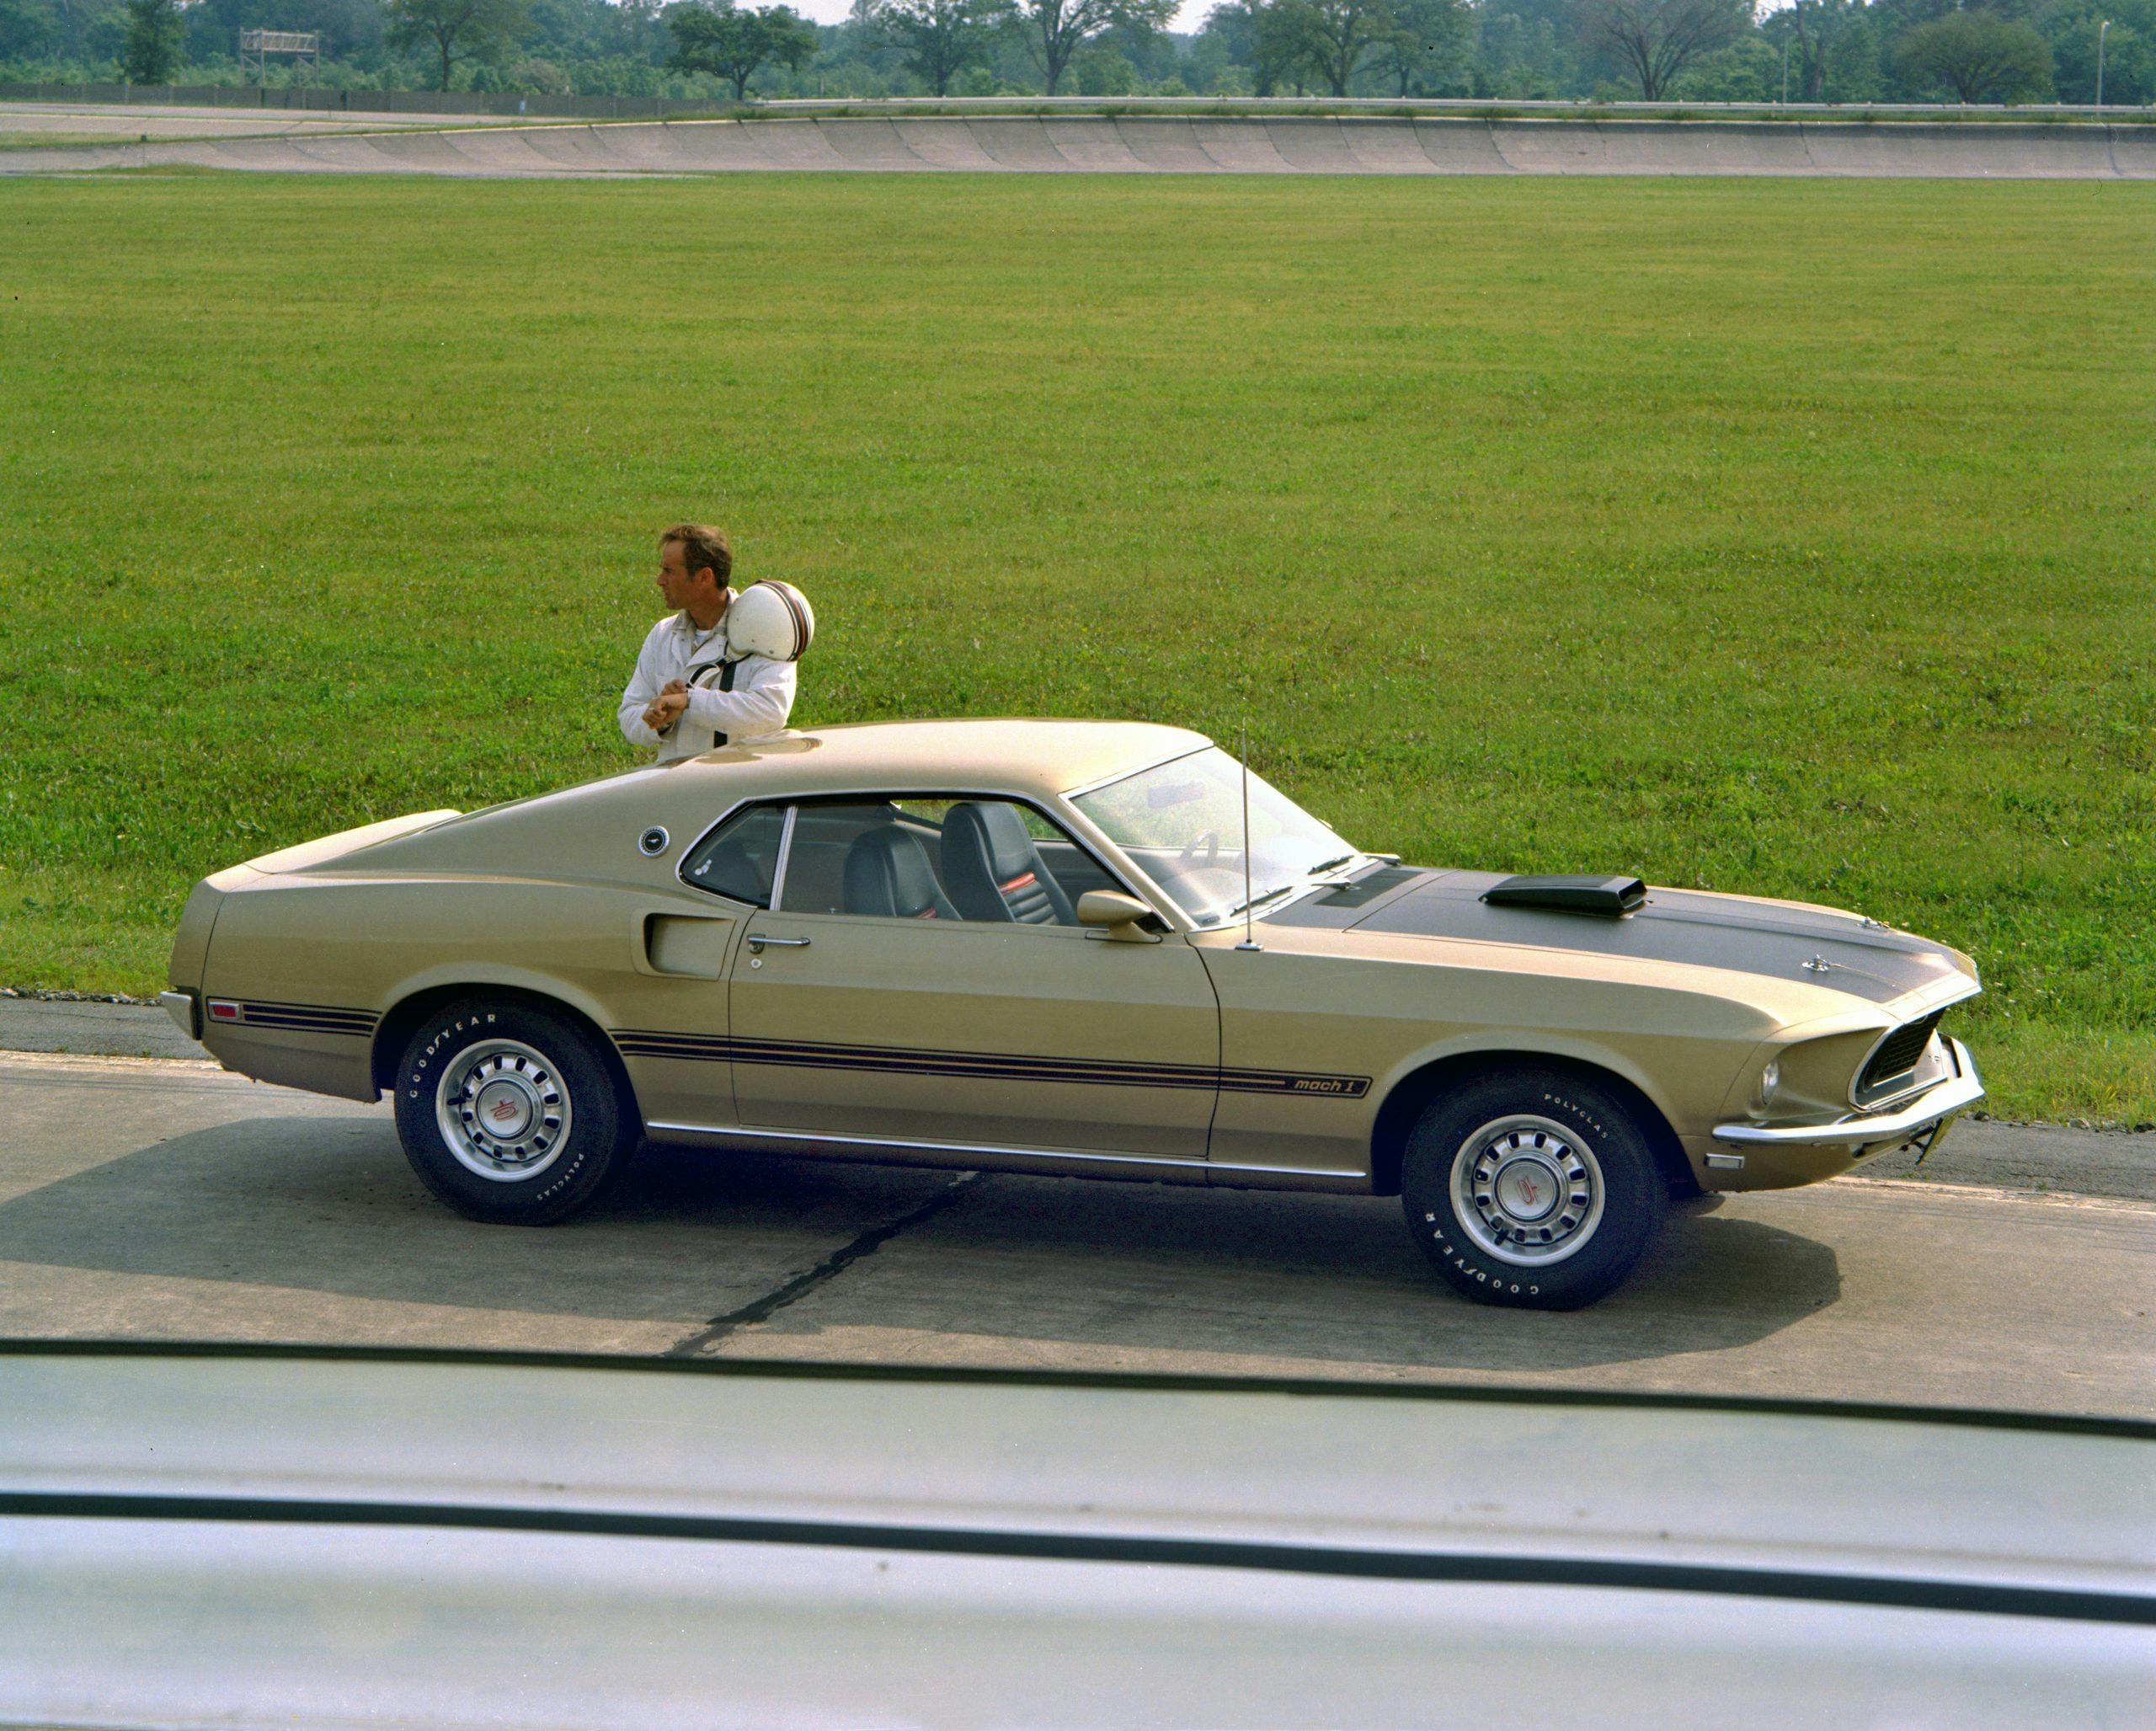 1969 Ford Mustang Mach 1 Fastback Side Profile At Track